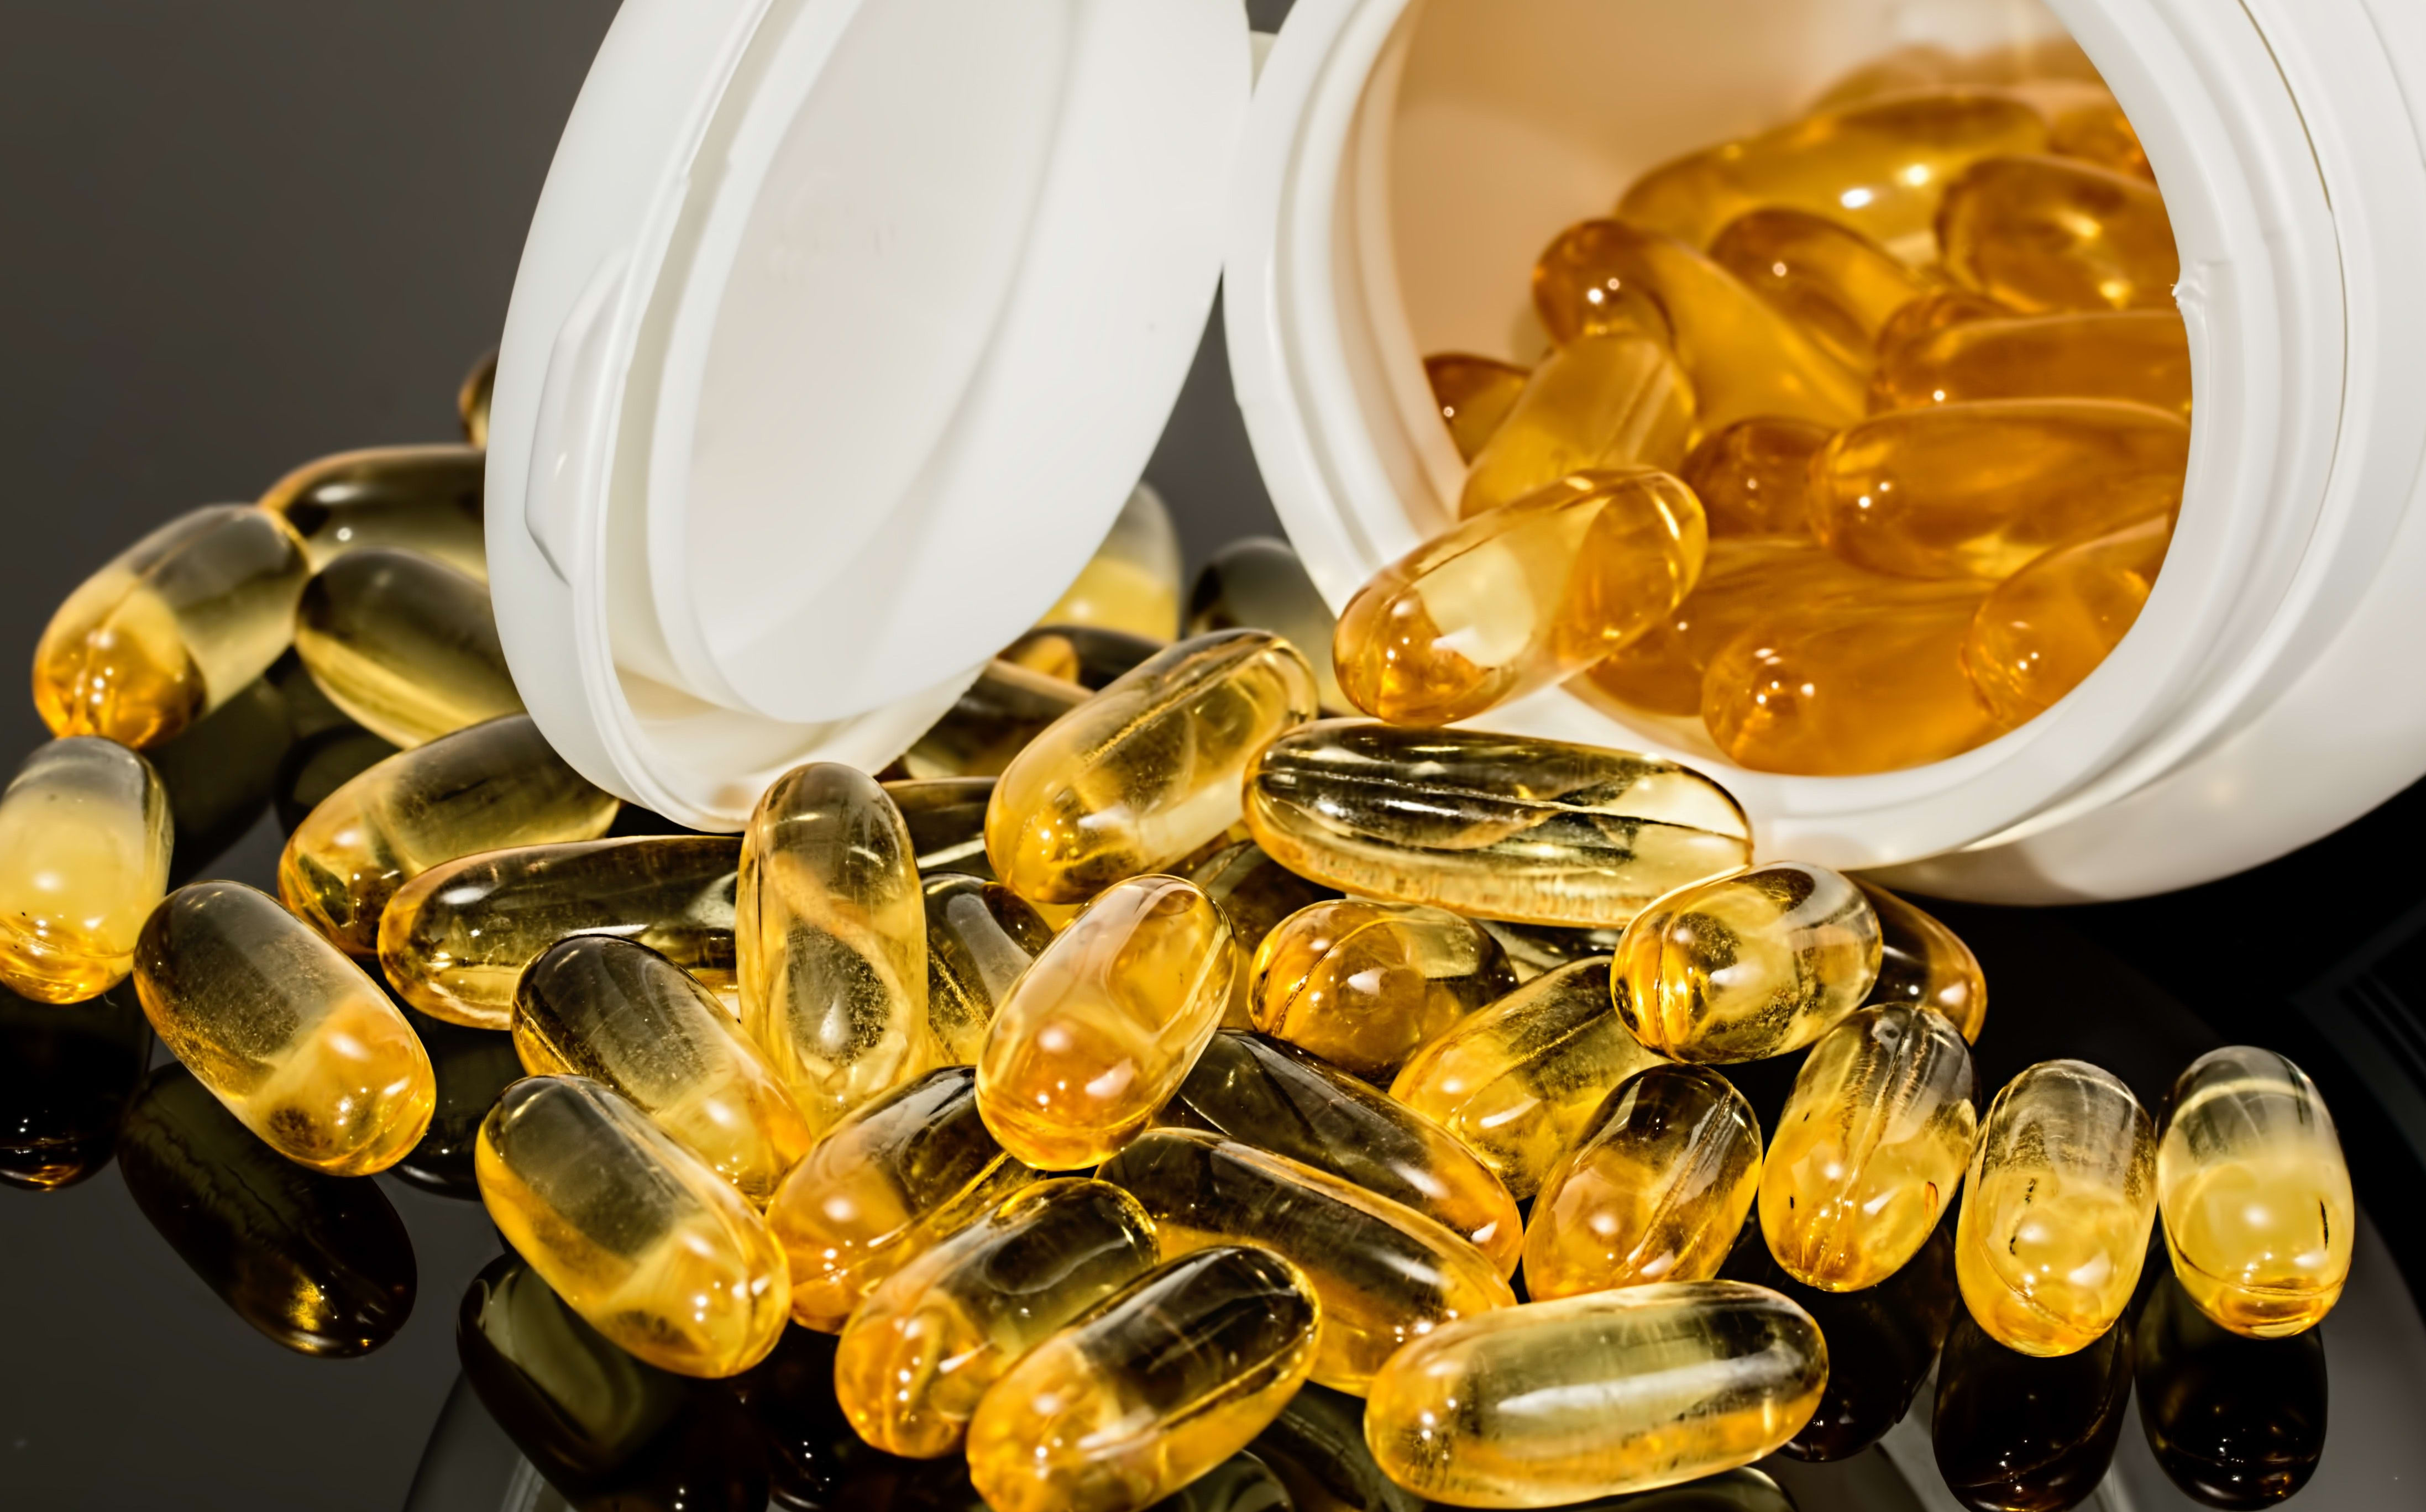 Can fish oil during pregnancy prevent babies' diabetes?